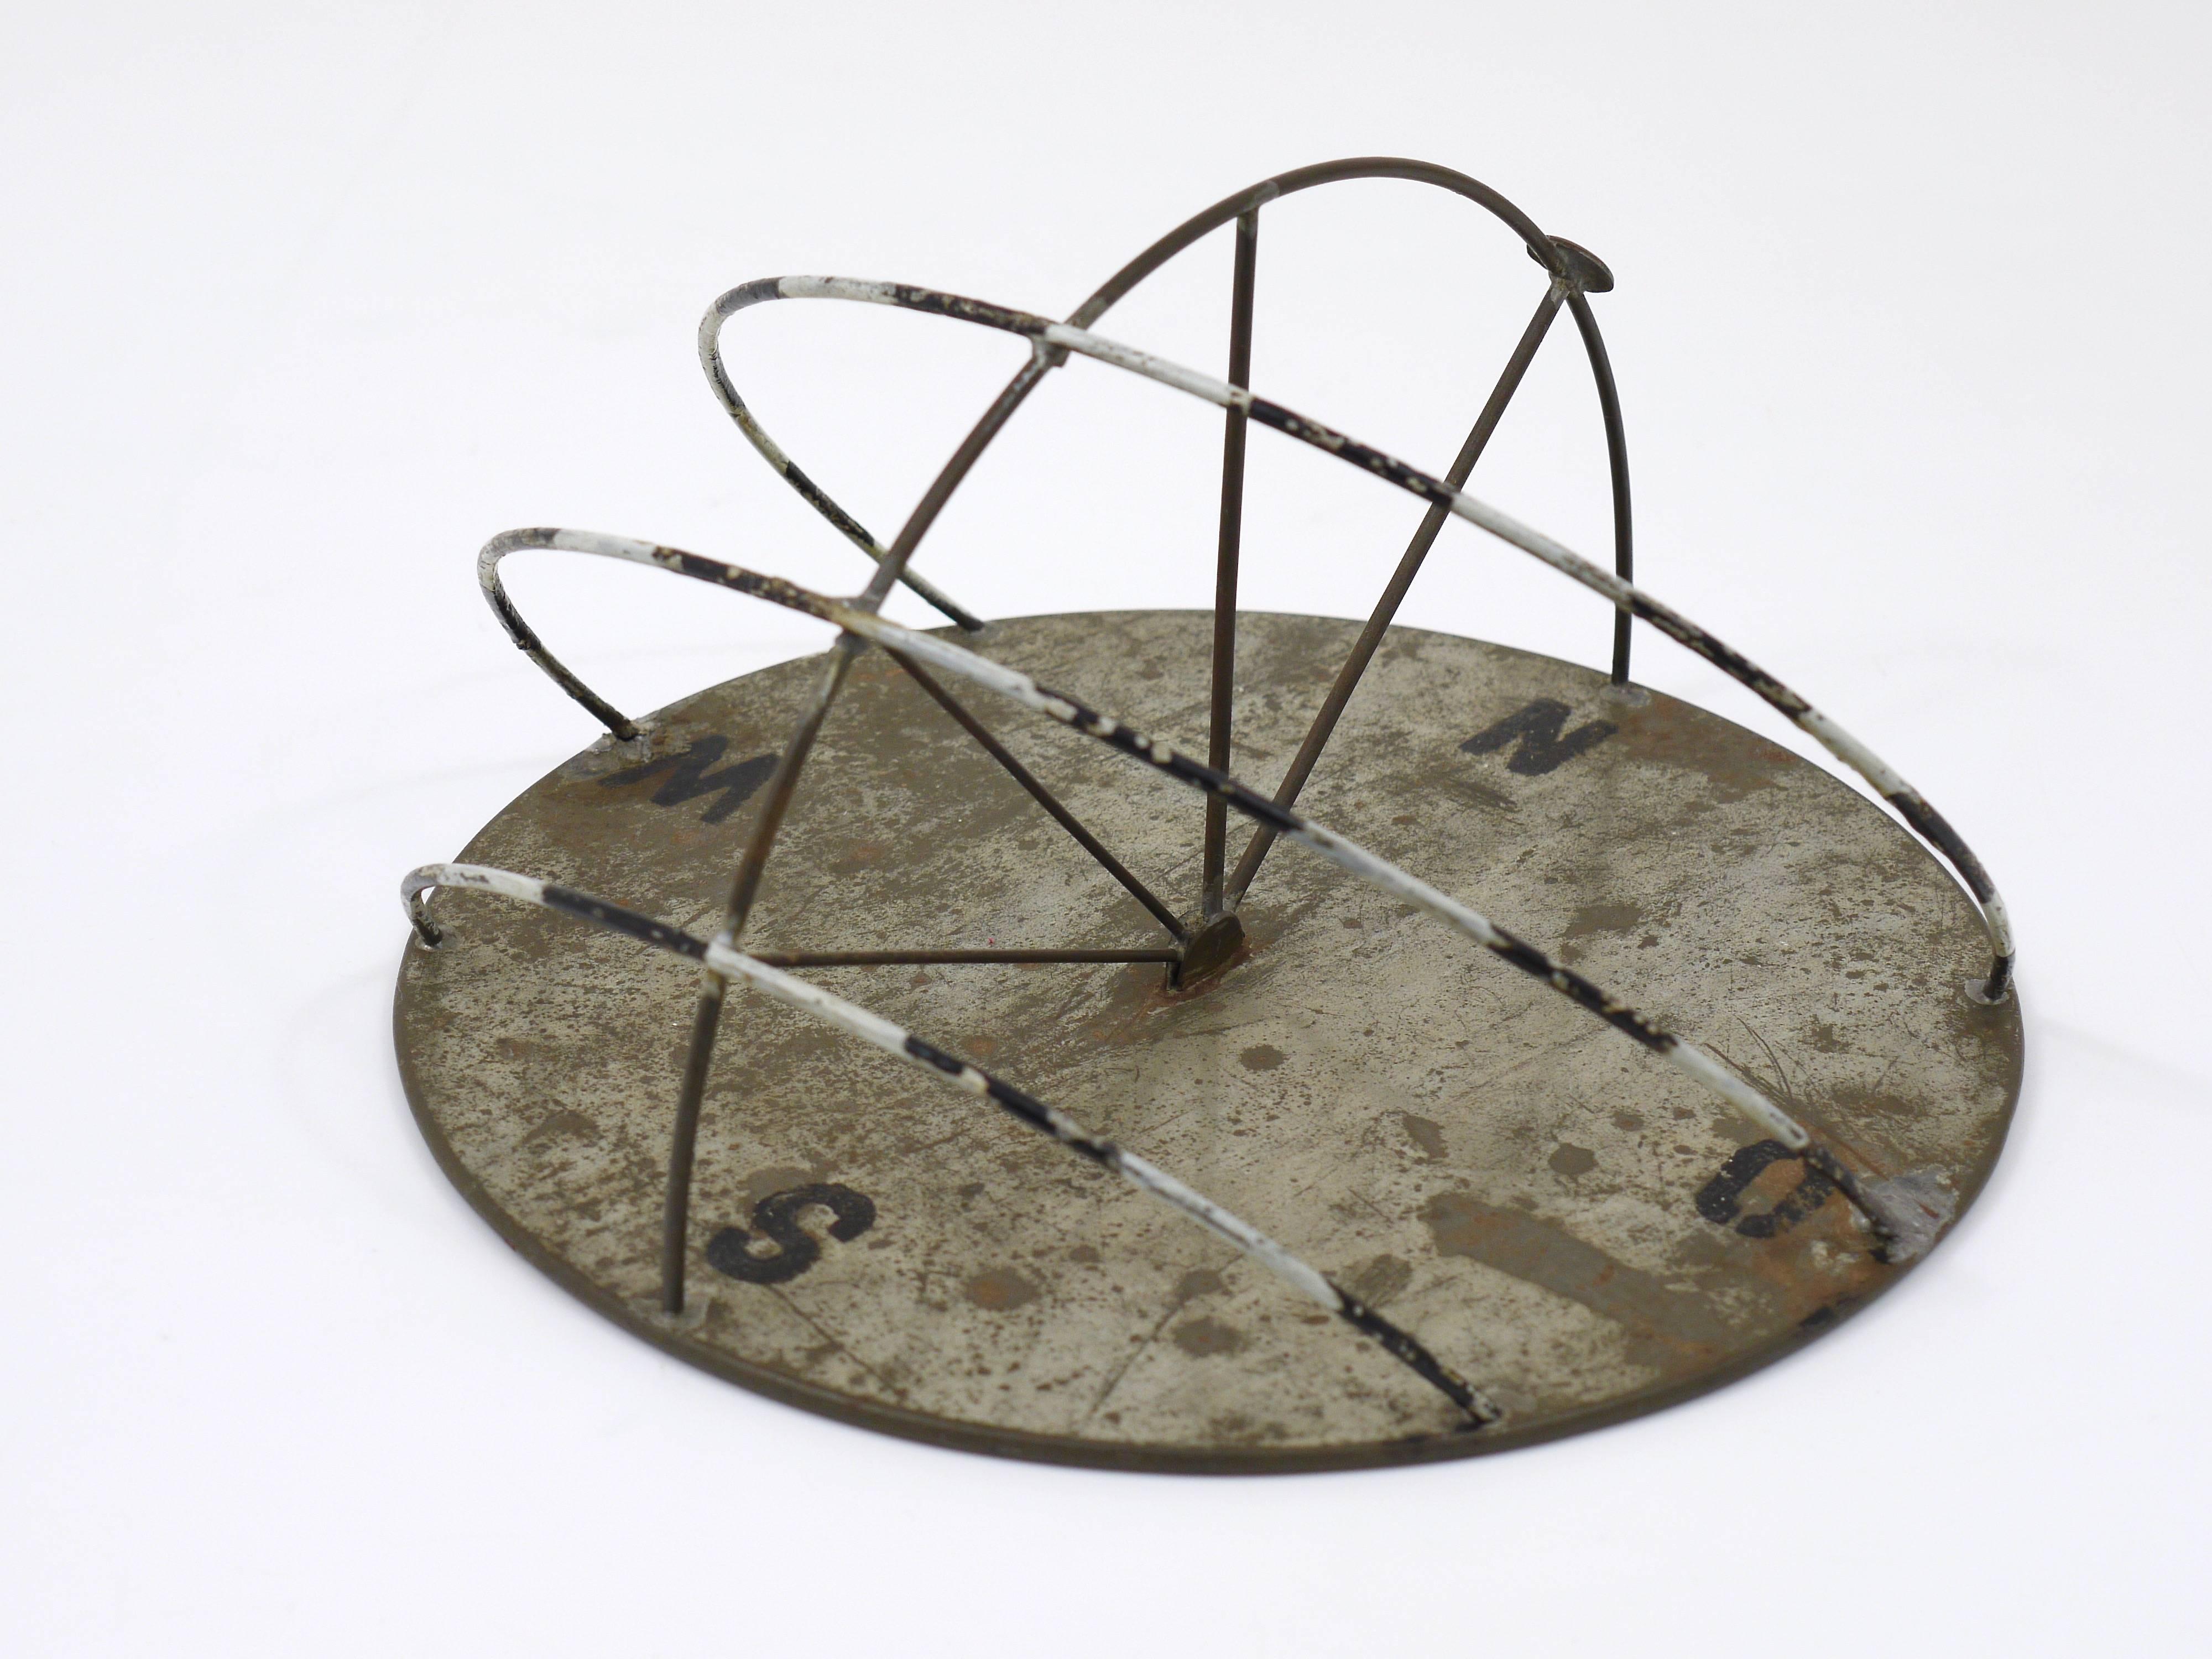 A beautiful sundial, made of iron, made in Germany in the 1950s with nice patina.